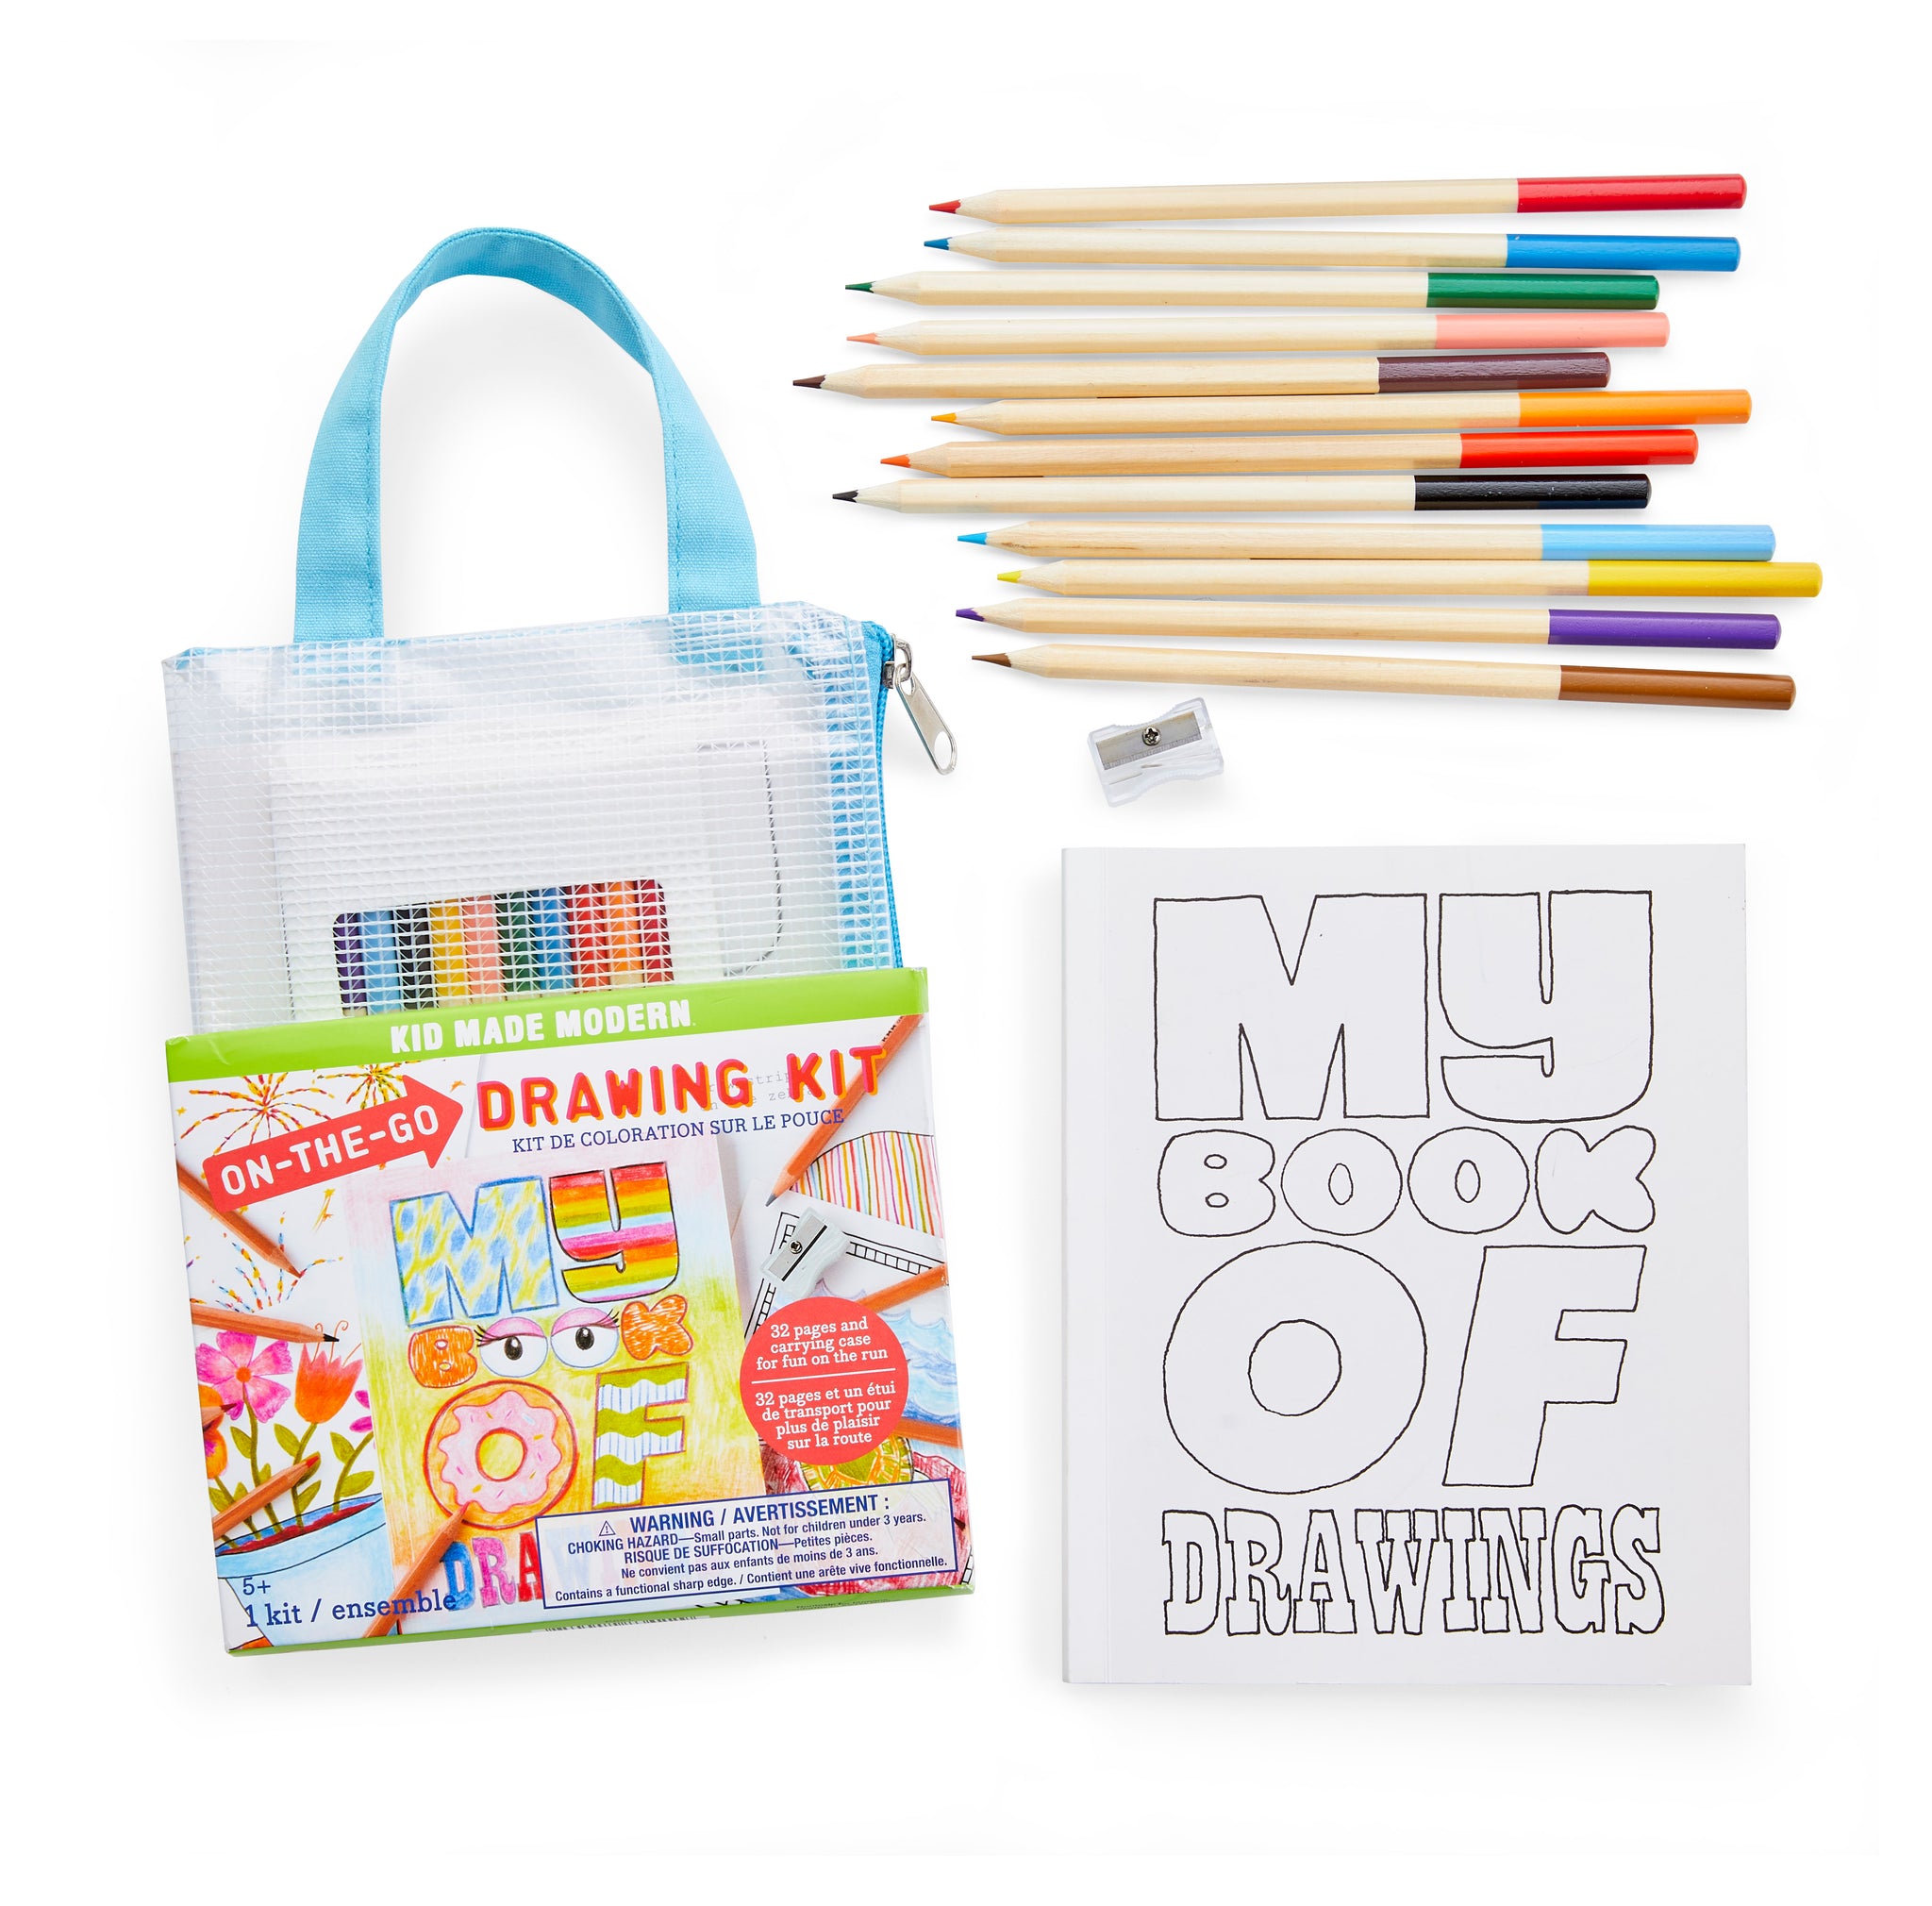 6 Pack: Kid Made Modern® On-The-Go Learn to Draw Kit